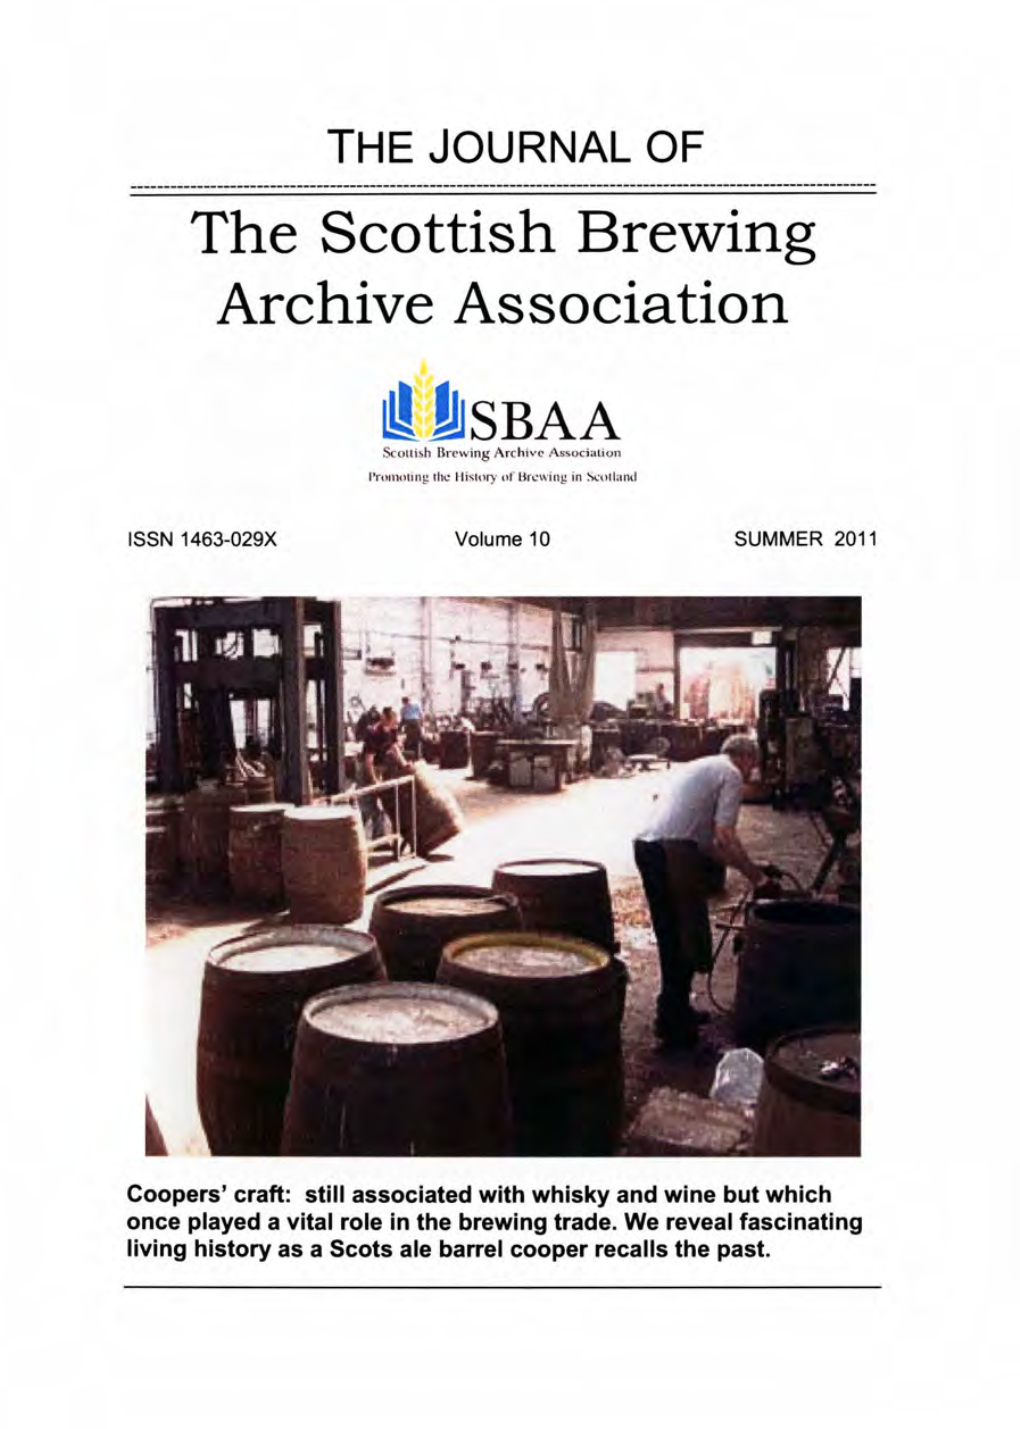 The Scottish Brewing Archive Association